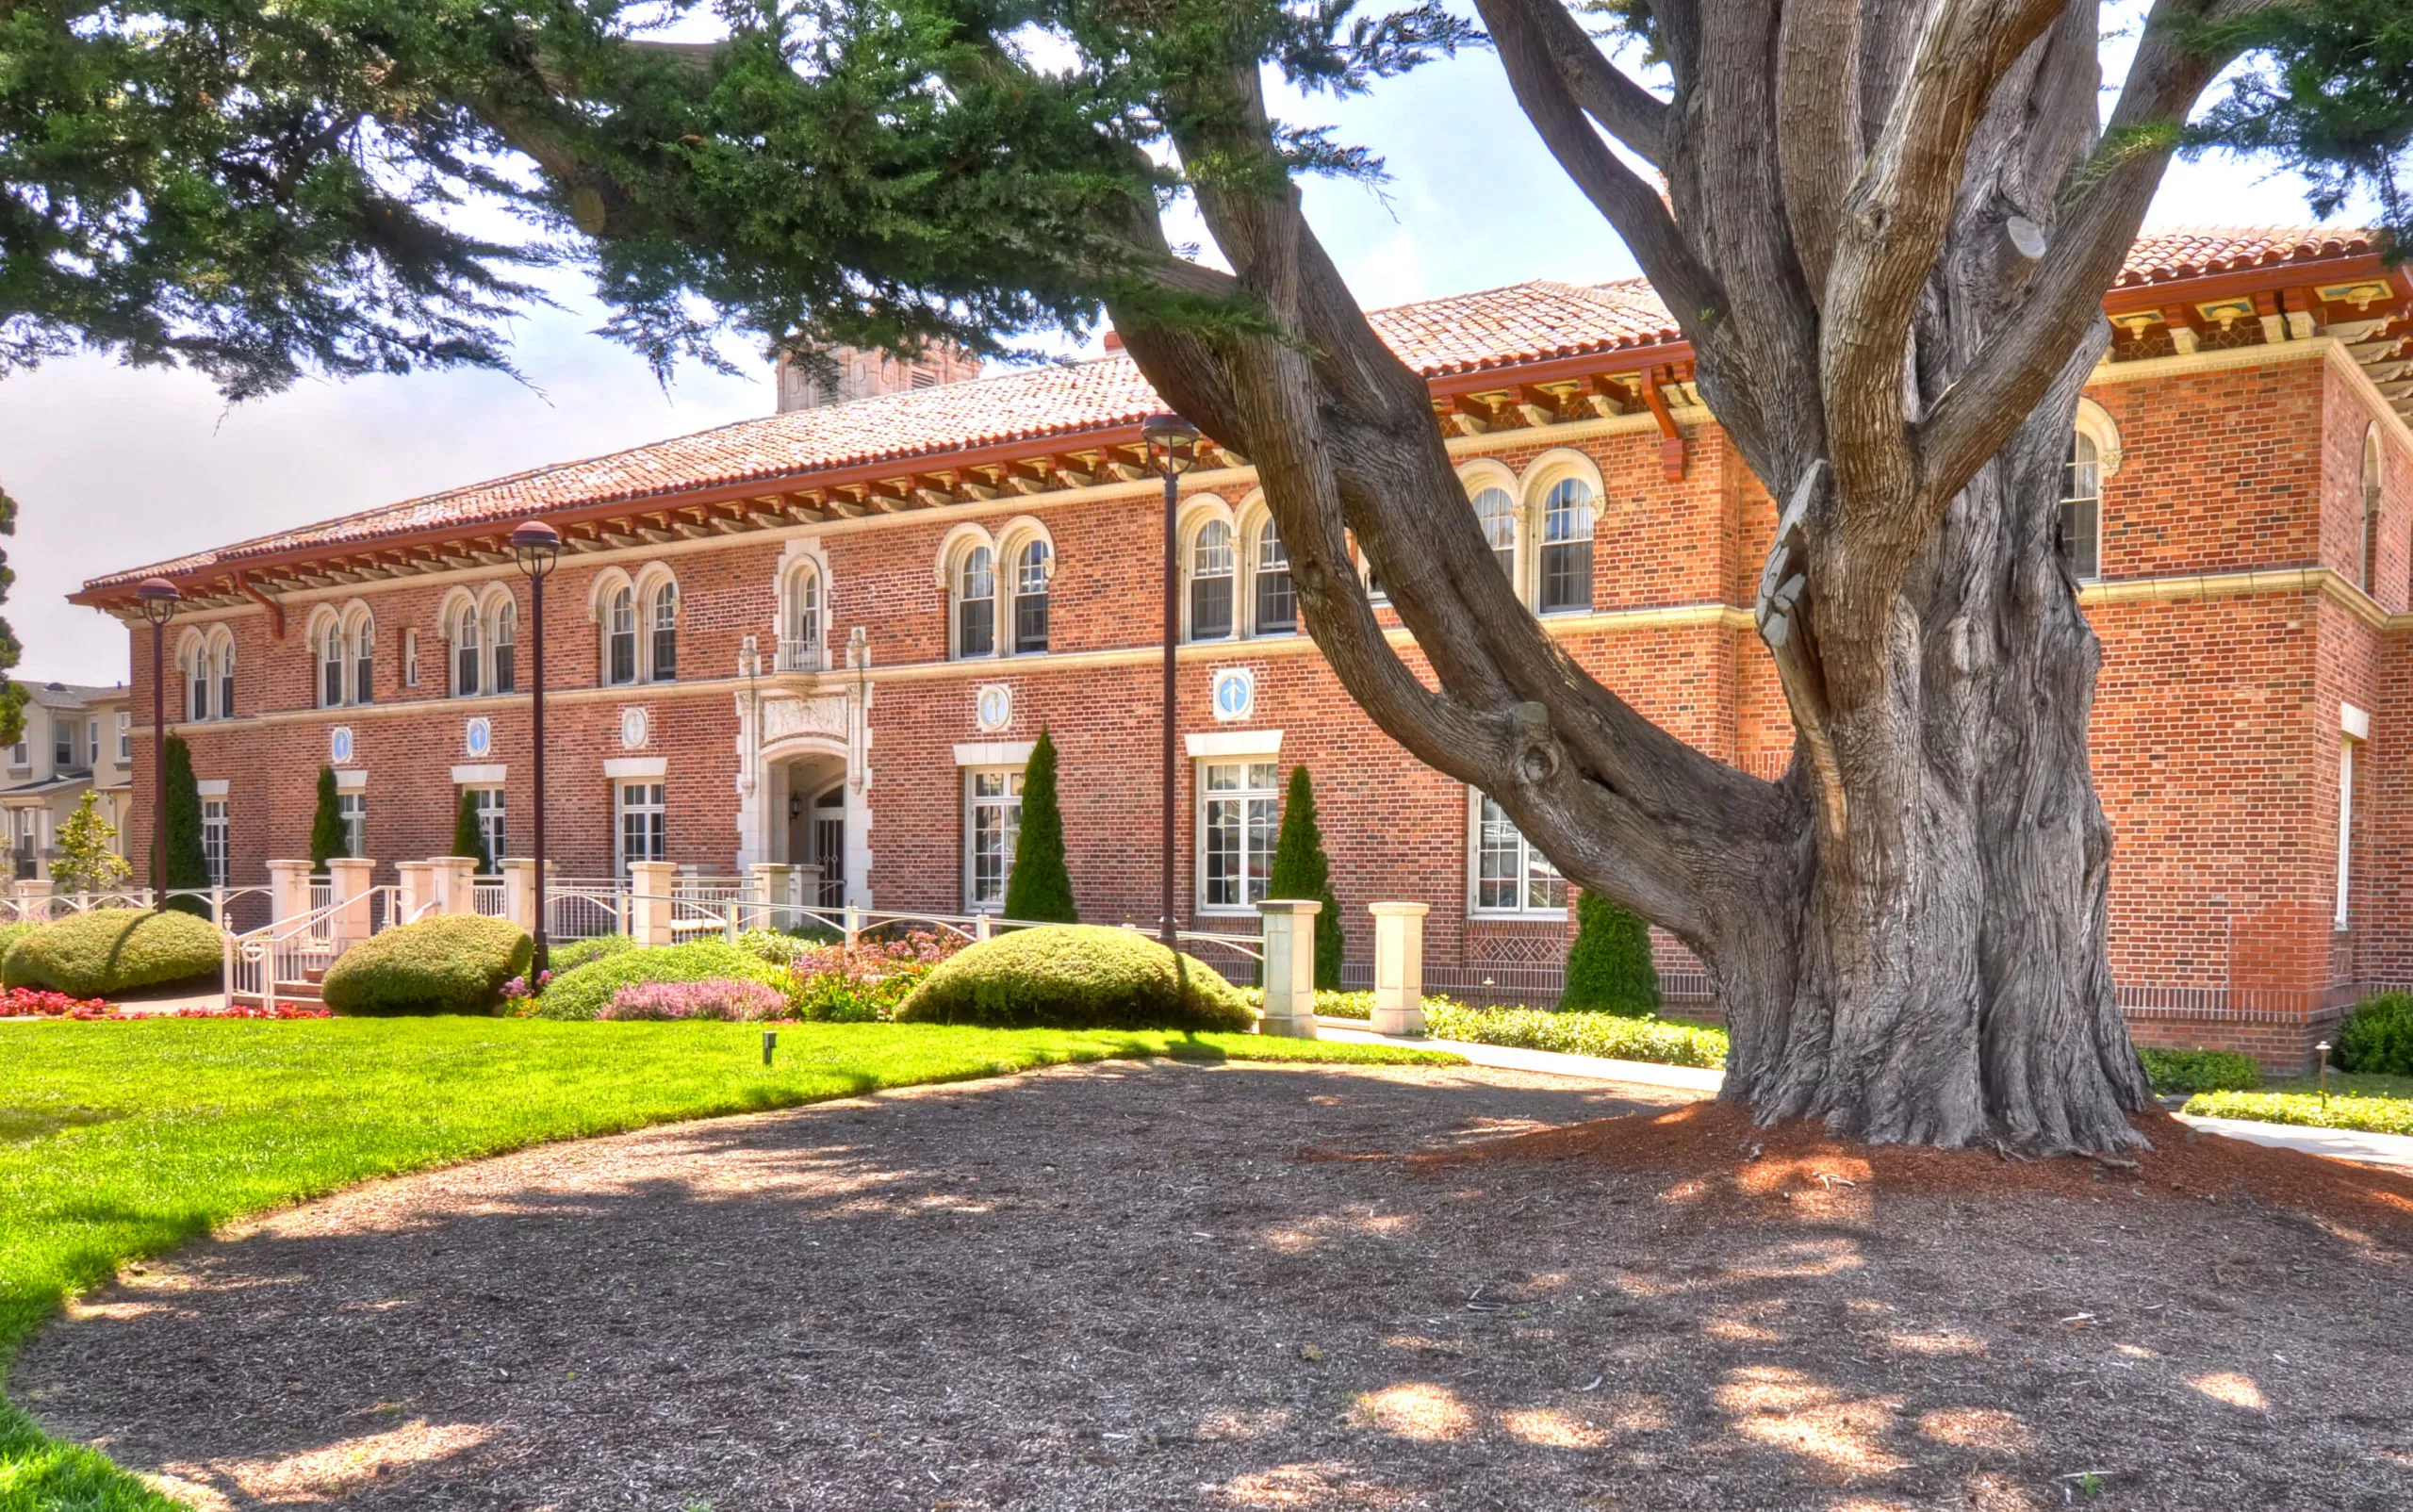 large brick building and large tree